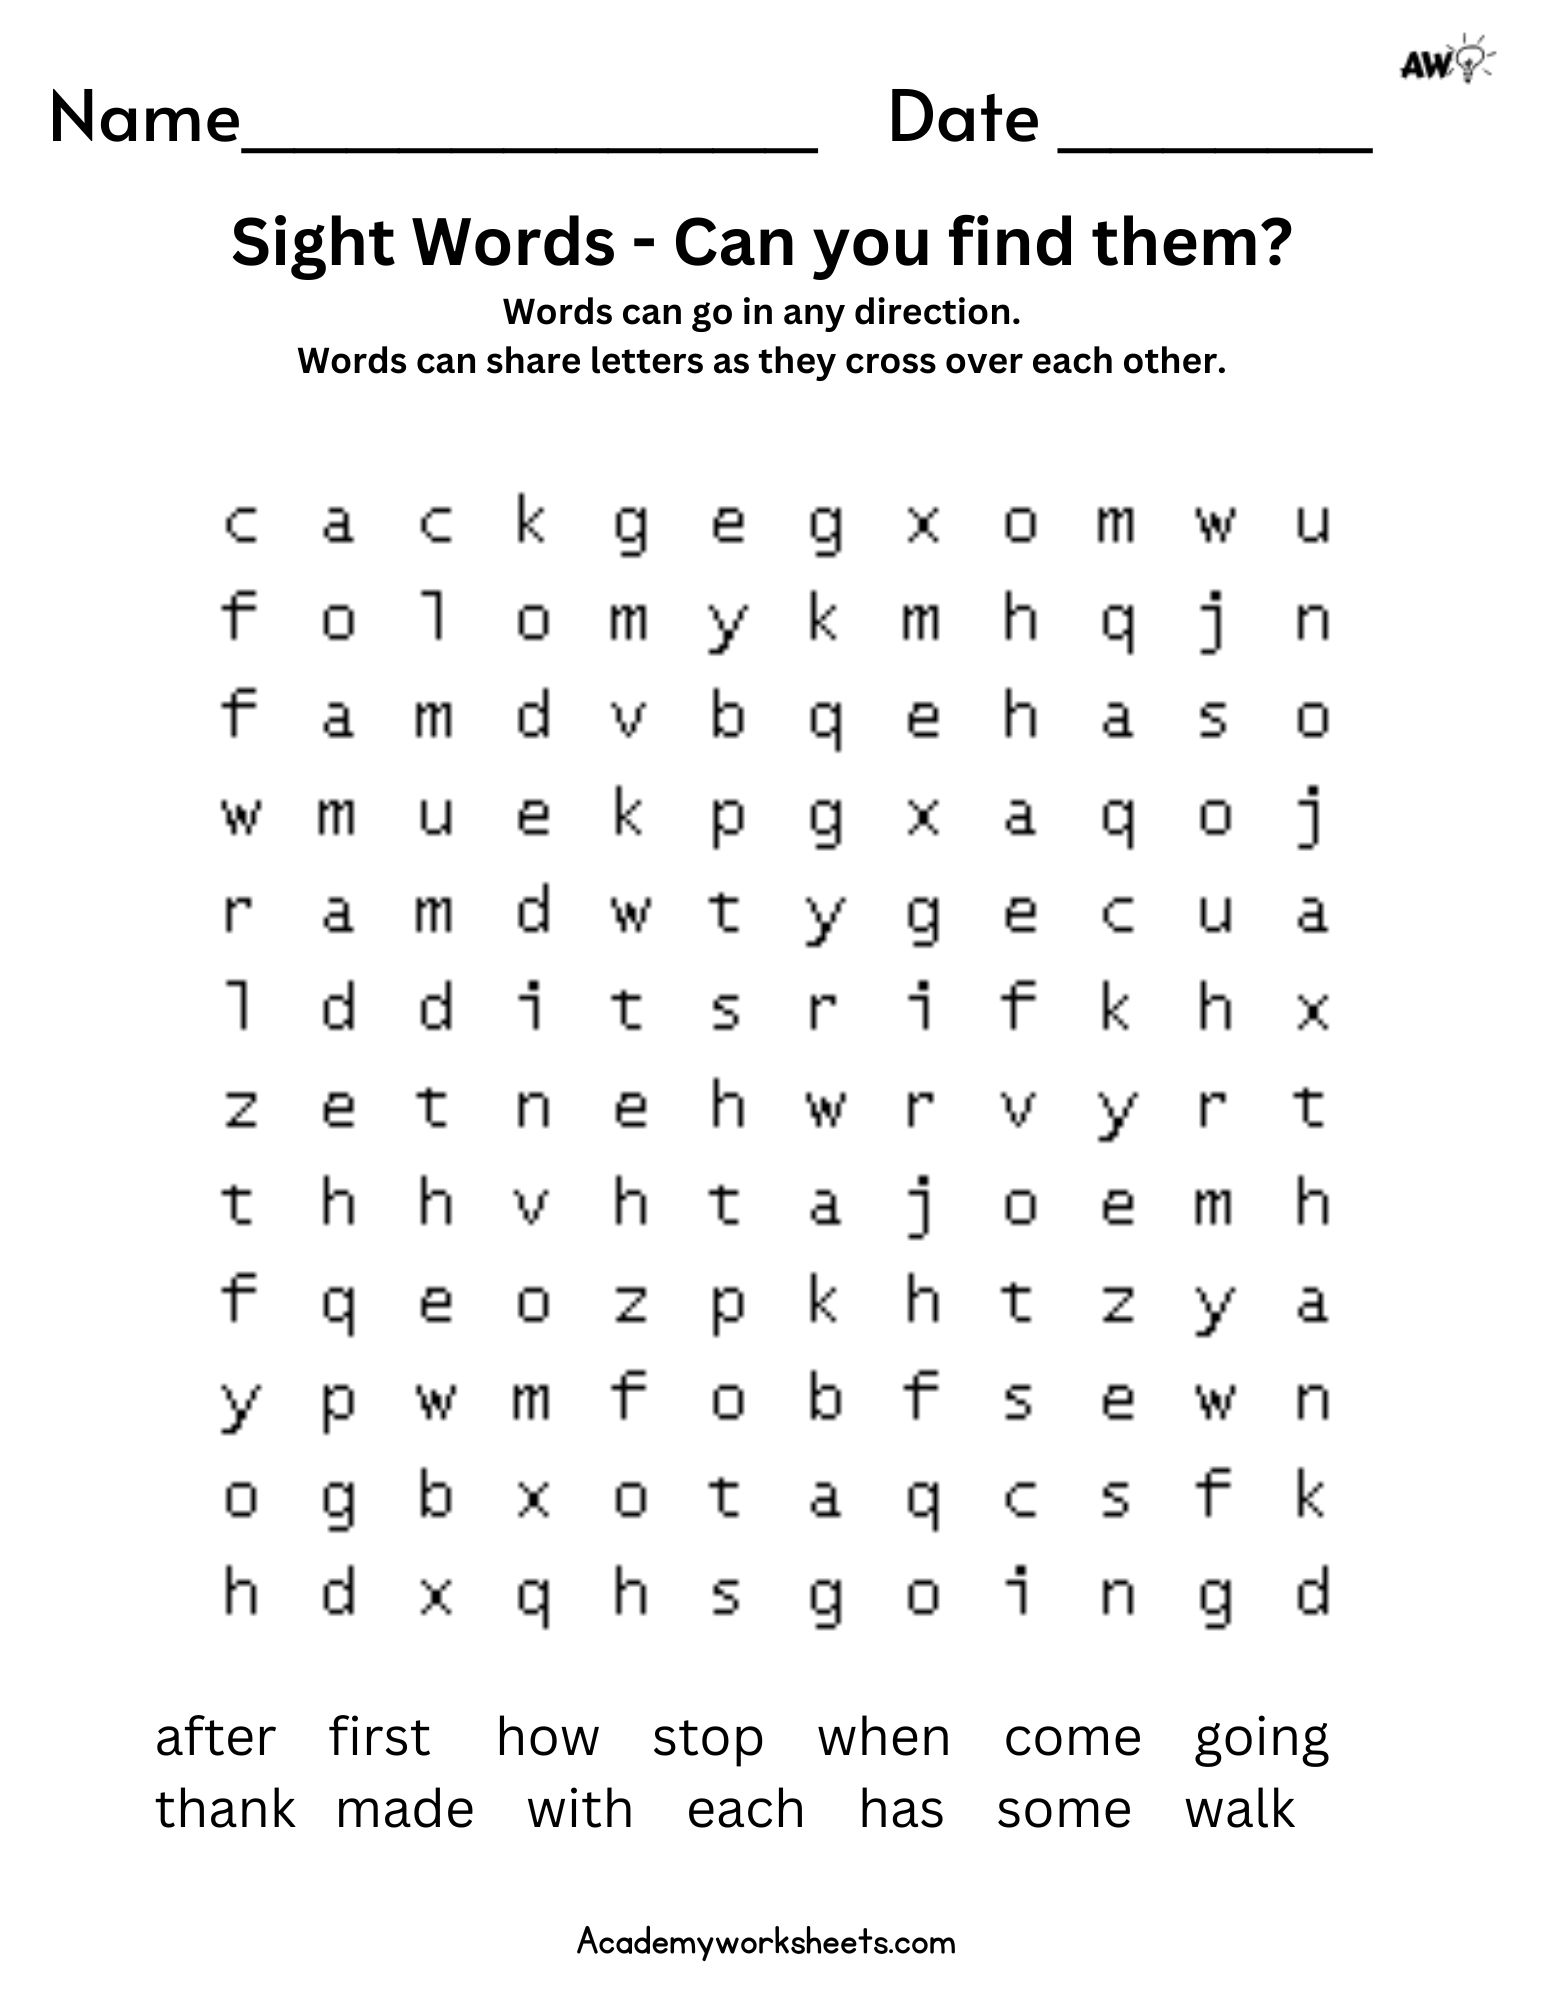 the-best-1st-grade-sight-words-word-search-academy-worksheets